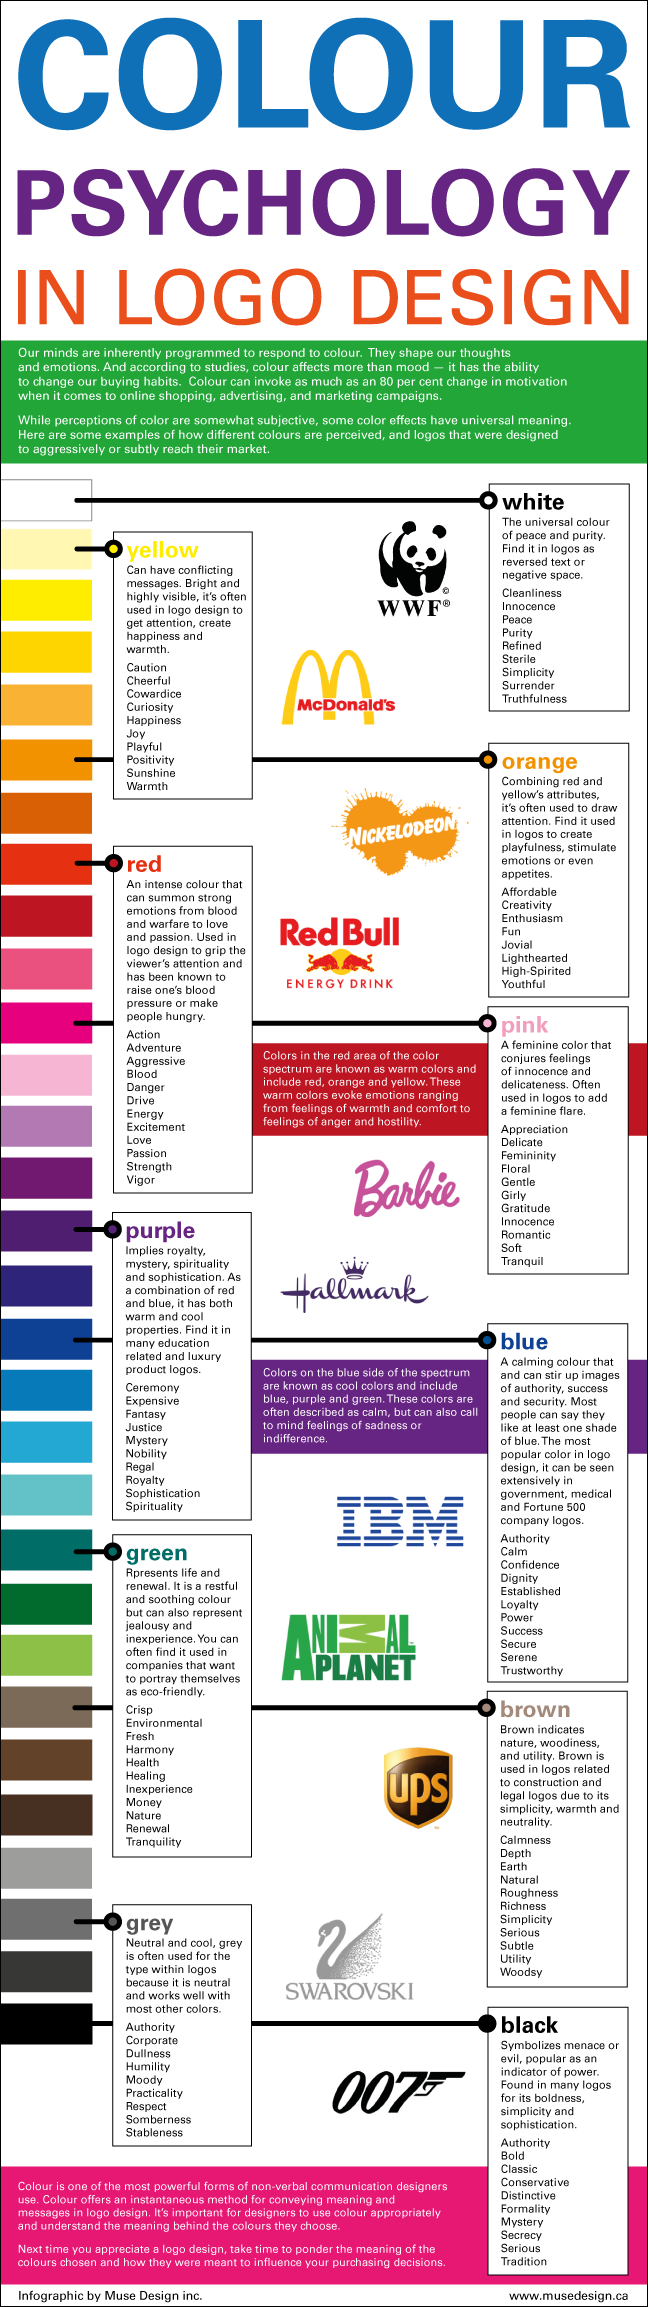 Colour Psychology in Graphic Design